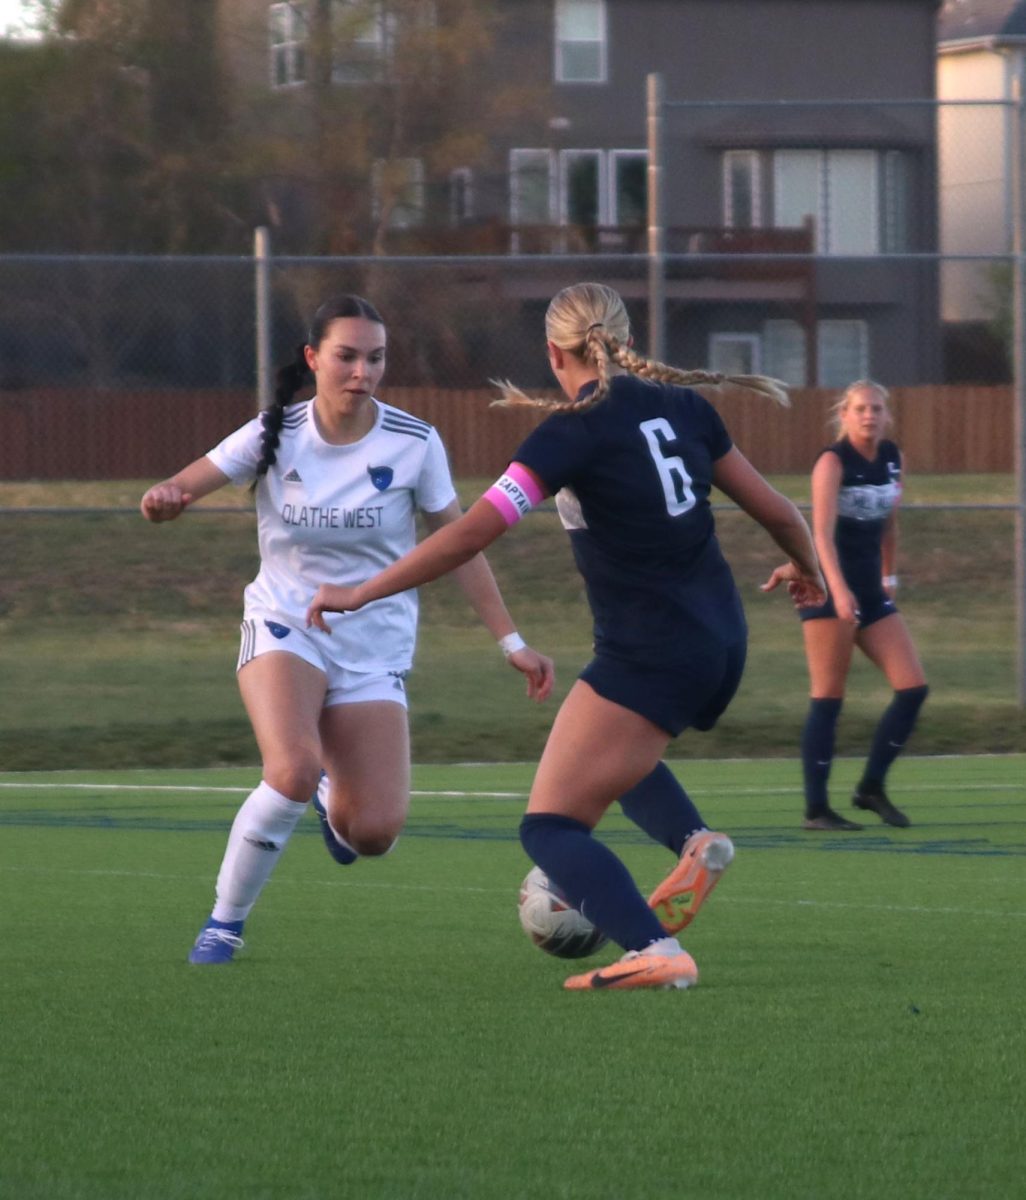 Dribbling the Ball across the field, junior Brooke Bellehumeur comes in contact with Olathe West